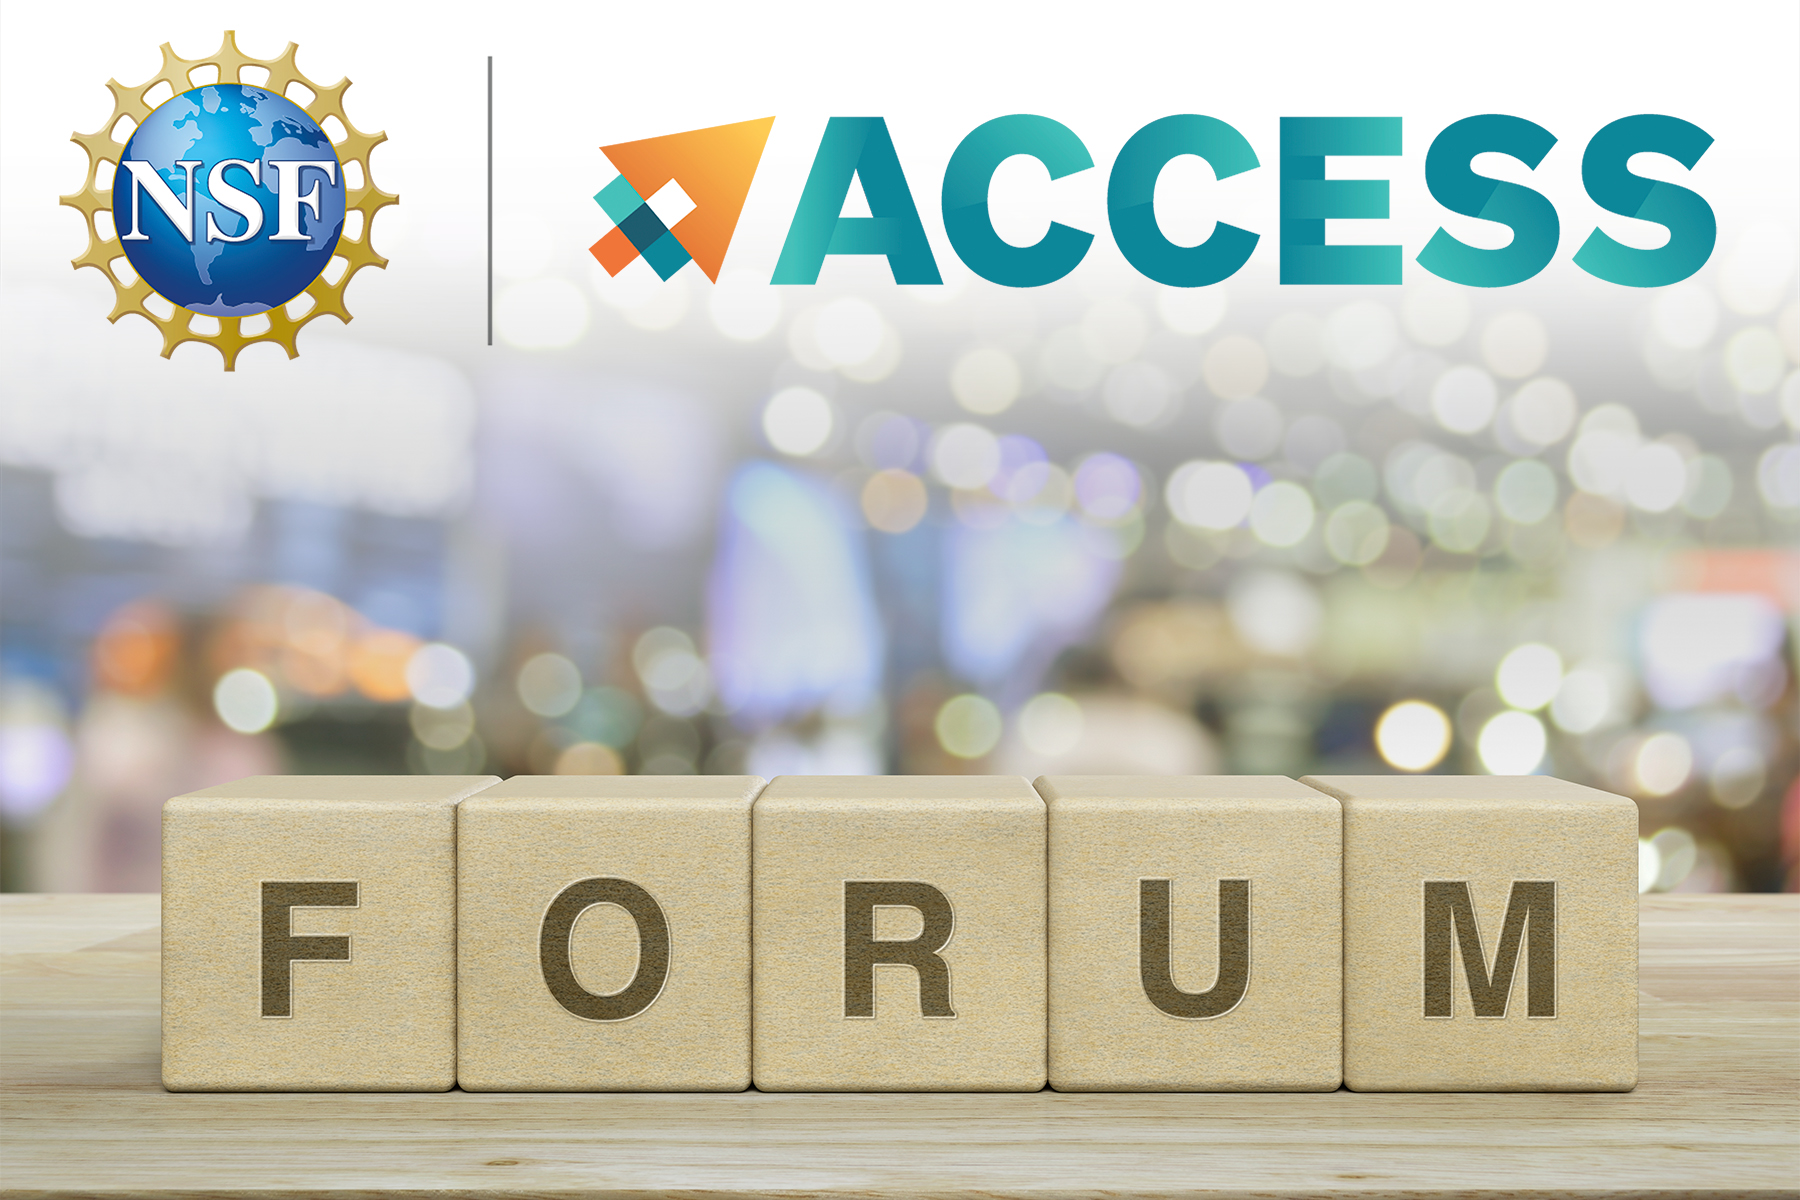 The NSF ACCESS logo is at the top of this image of wooden blocks spelling the word Forum.